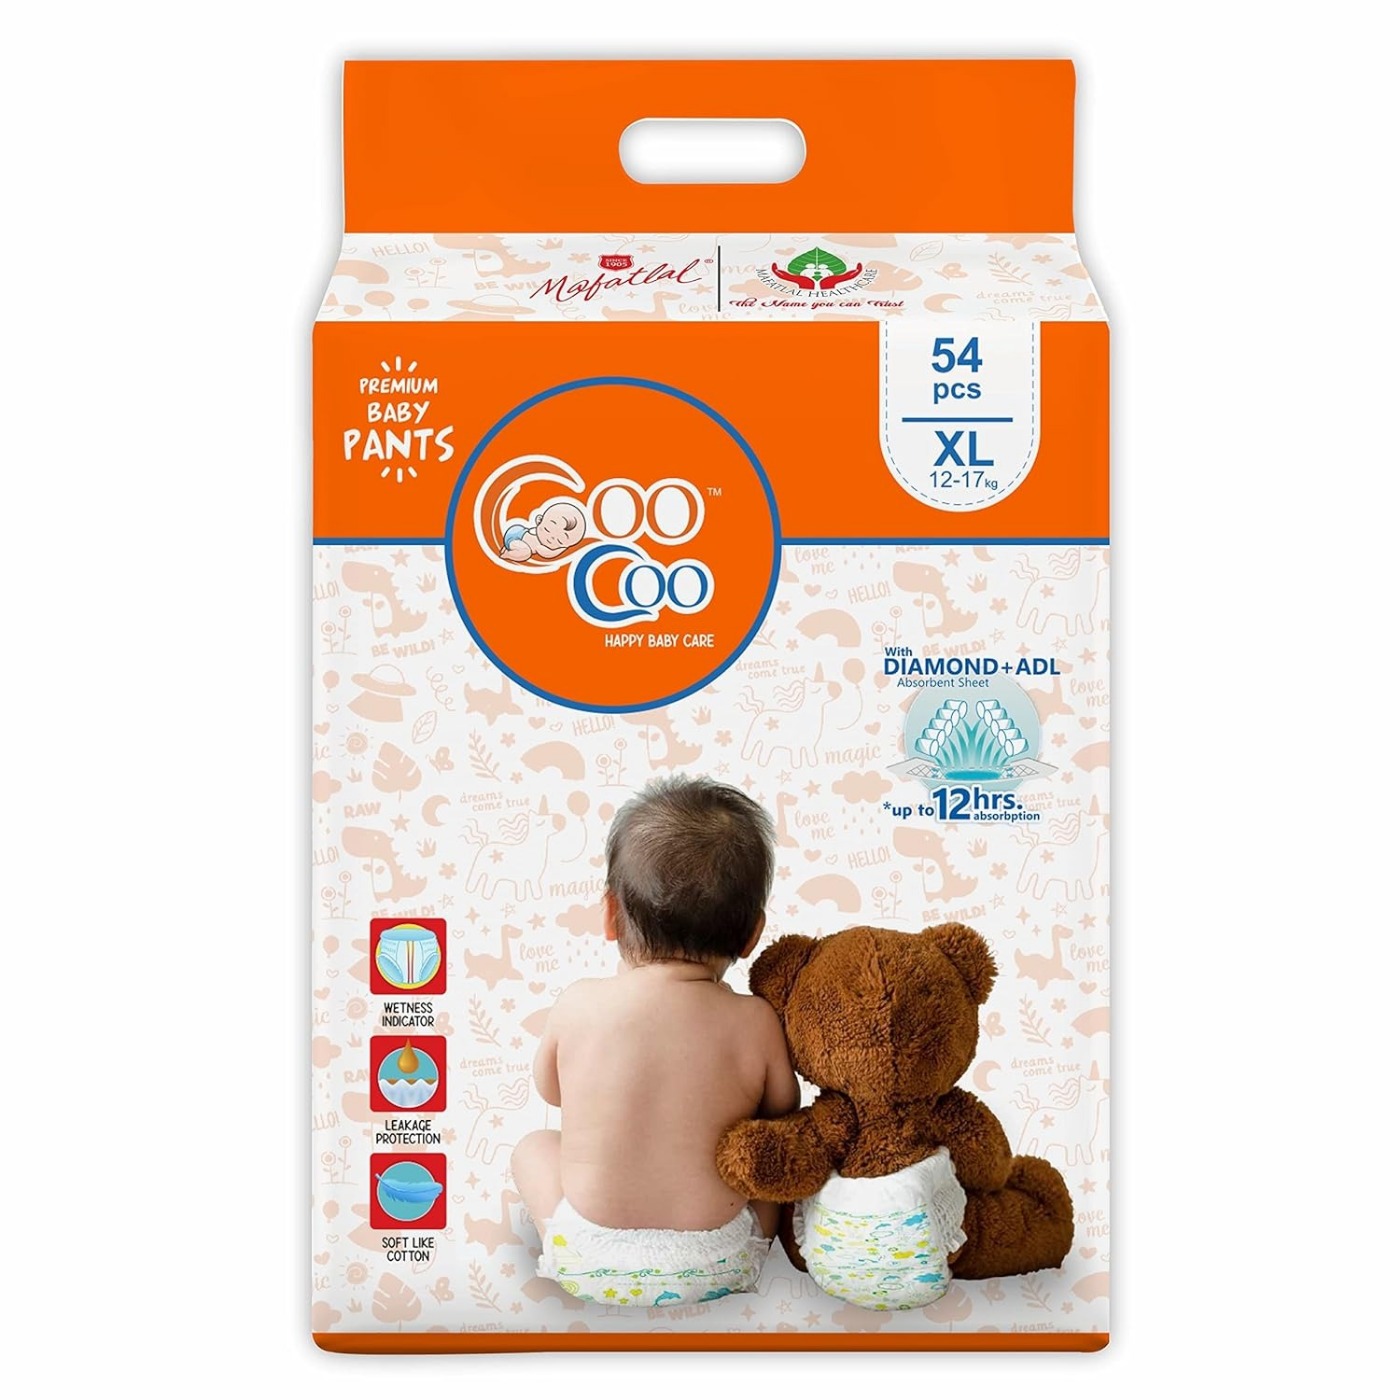 Coo Coo Extra Dry Baby Pullup Diaper Pant Size X- Large-XL (54) Count Upto 12-17 kg Super Absorbent Core Up to 12 Hrs Protection Soft Elastic Wa - X-Large, 54.0